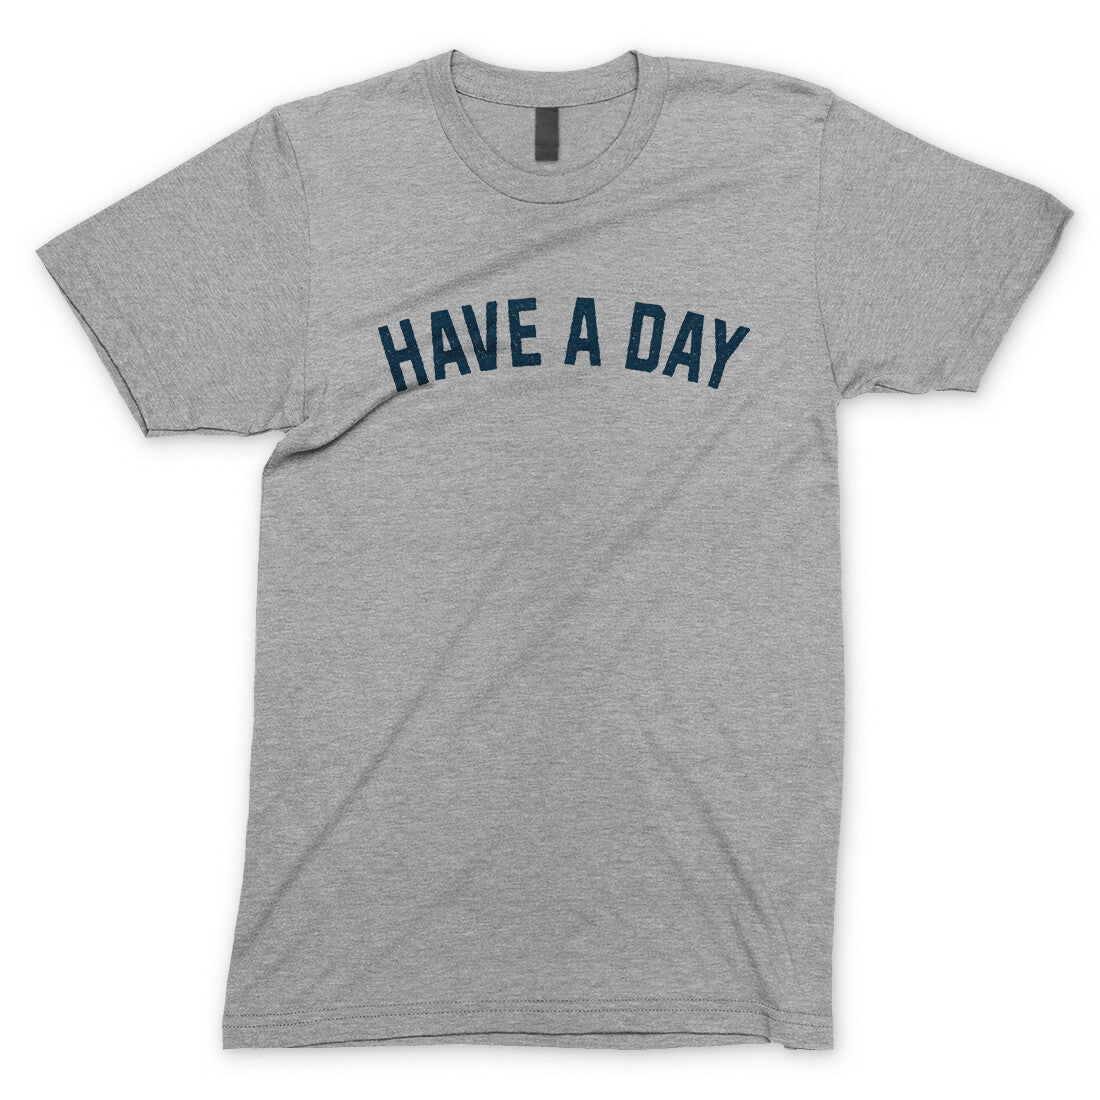 Have a Day in Sport Grey Color